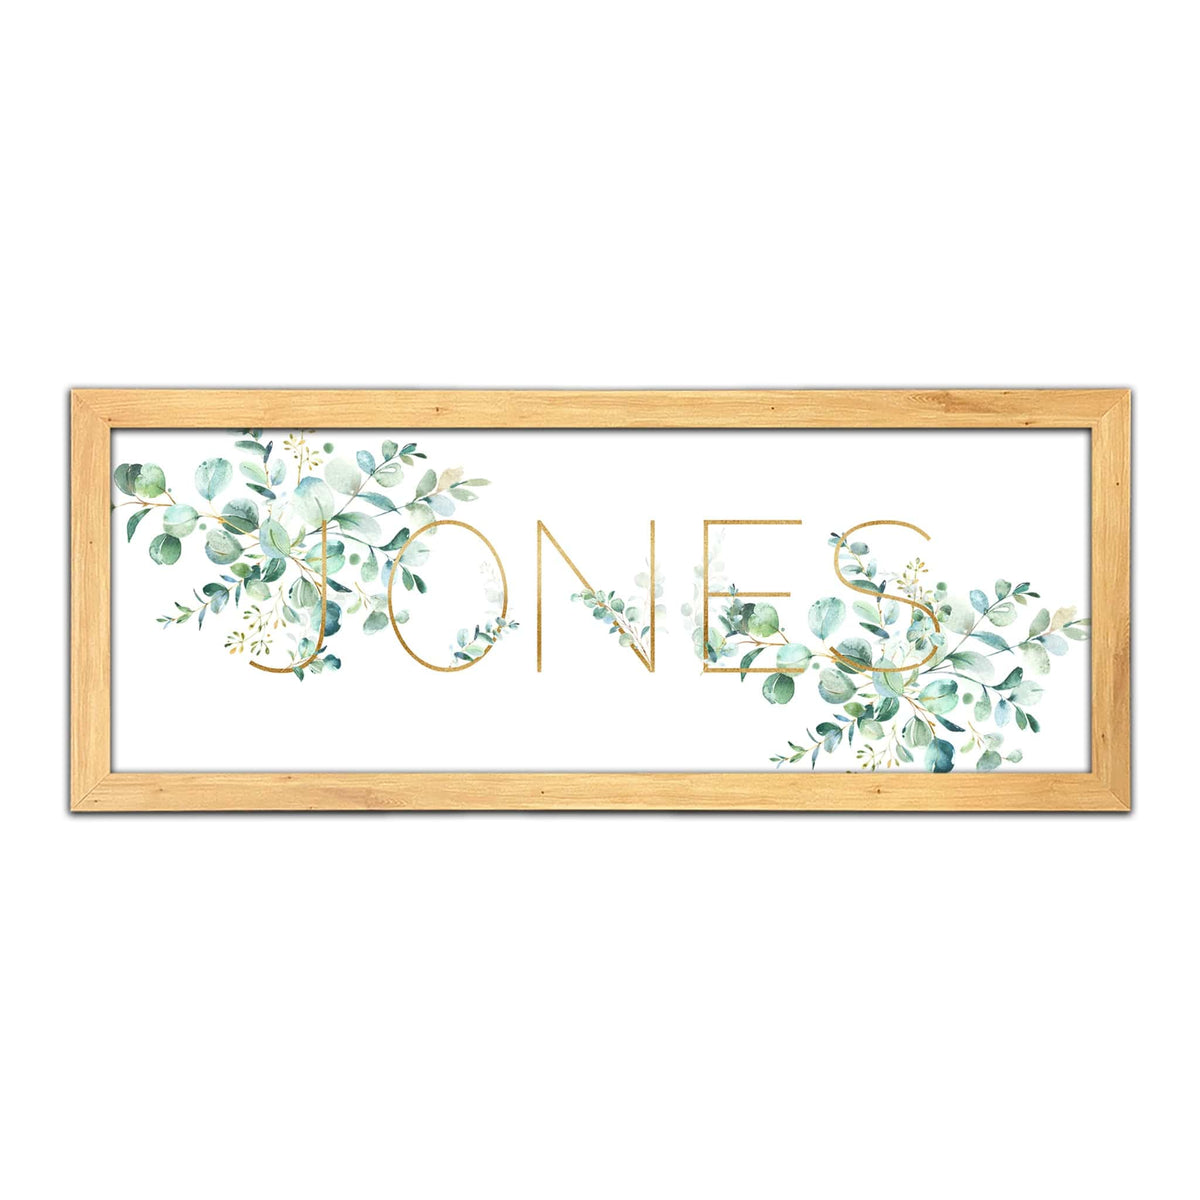 Personalized watercolor name art gift from Personal Prints